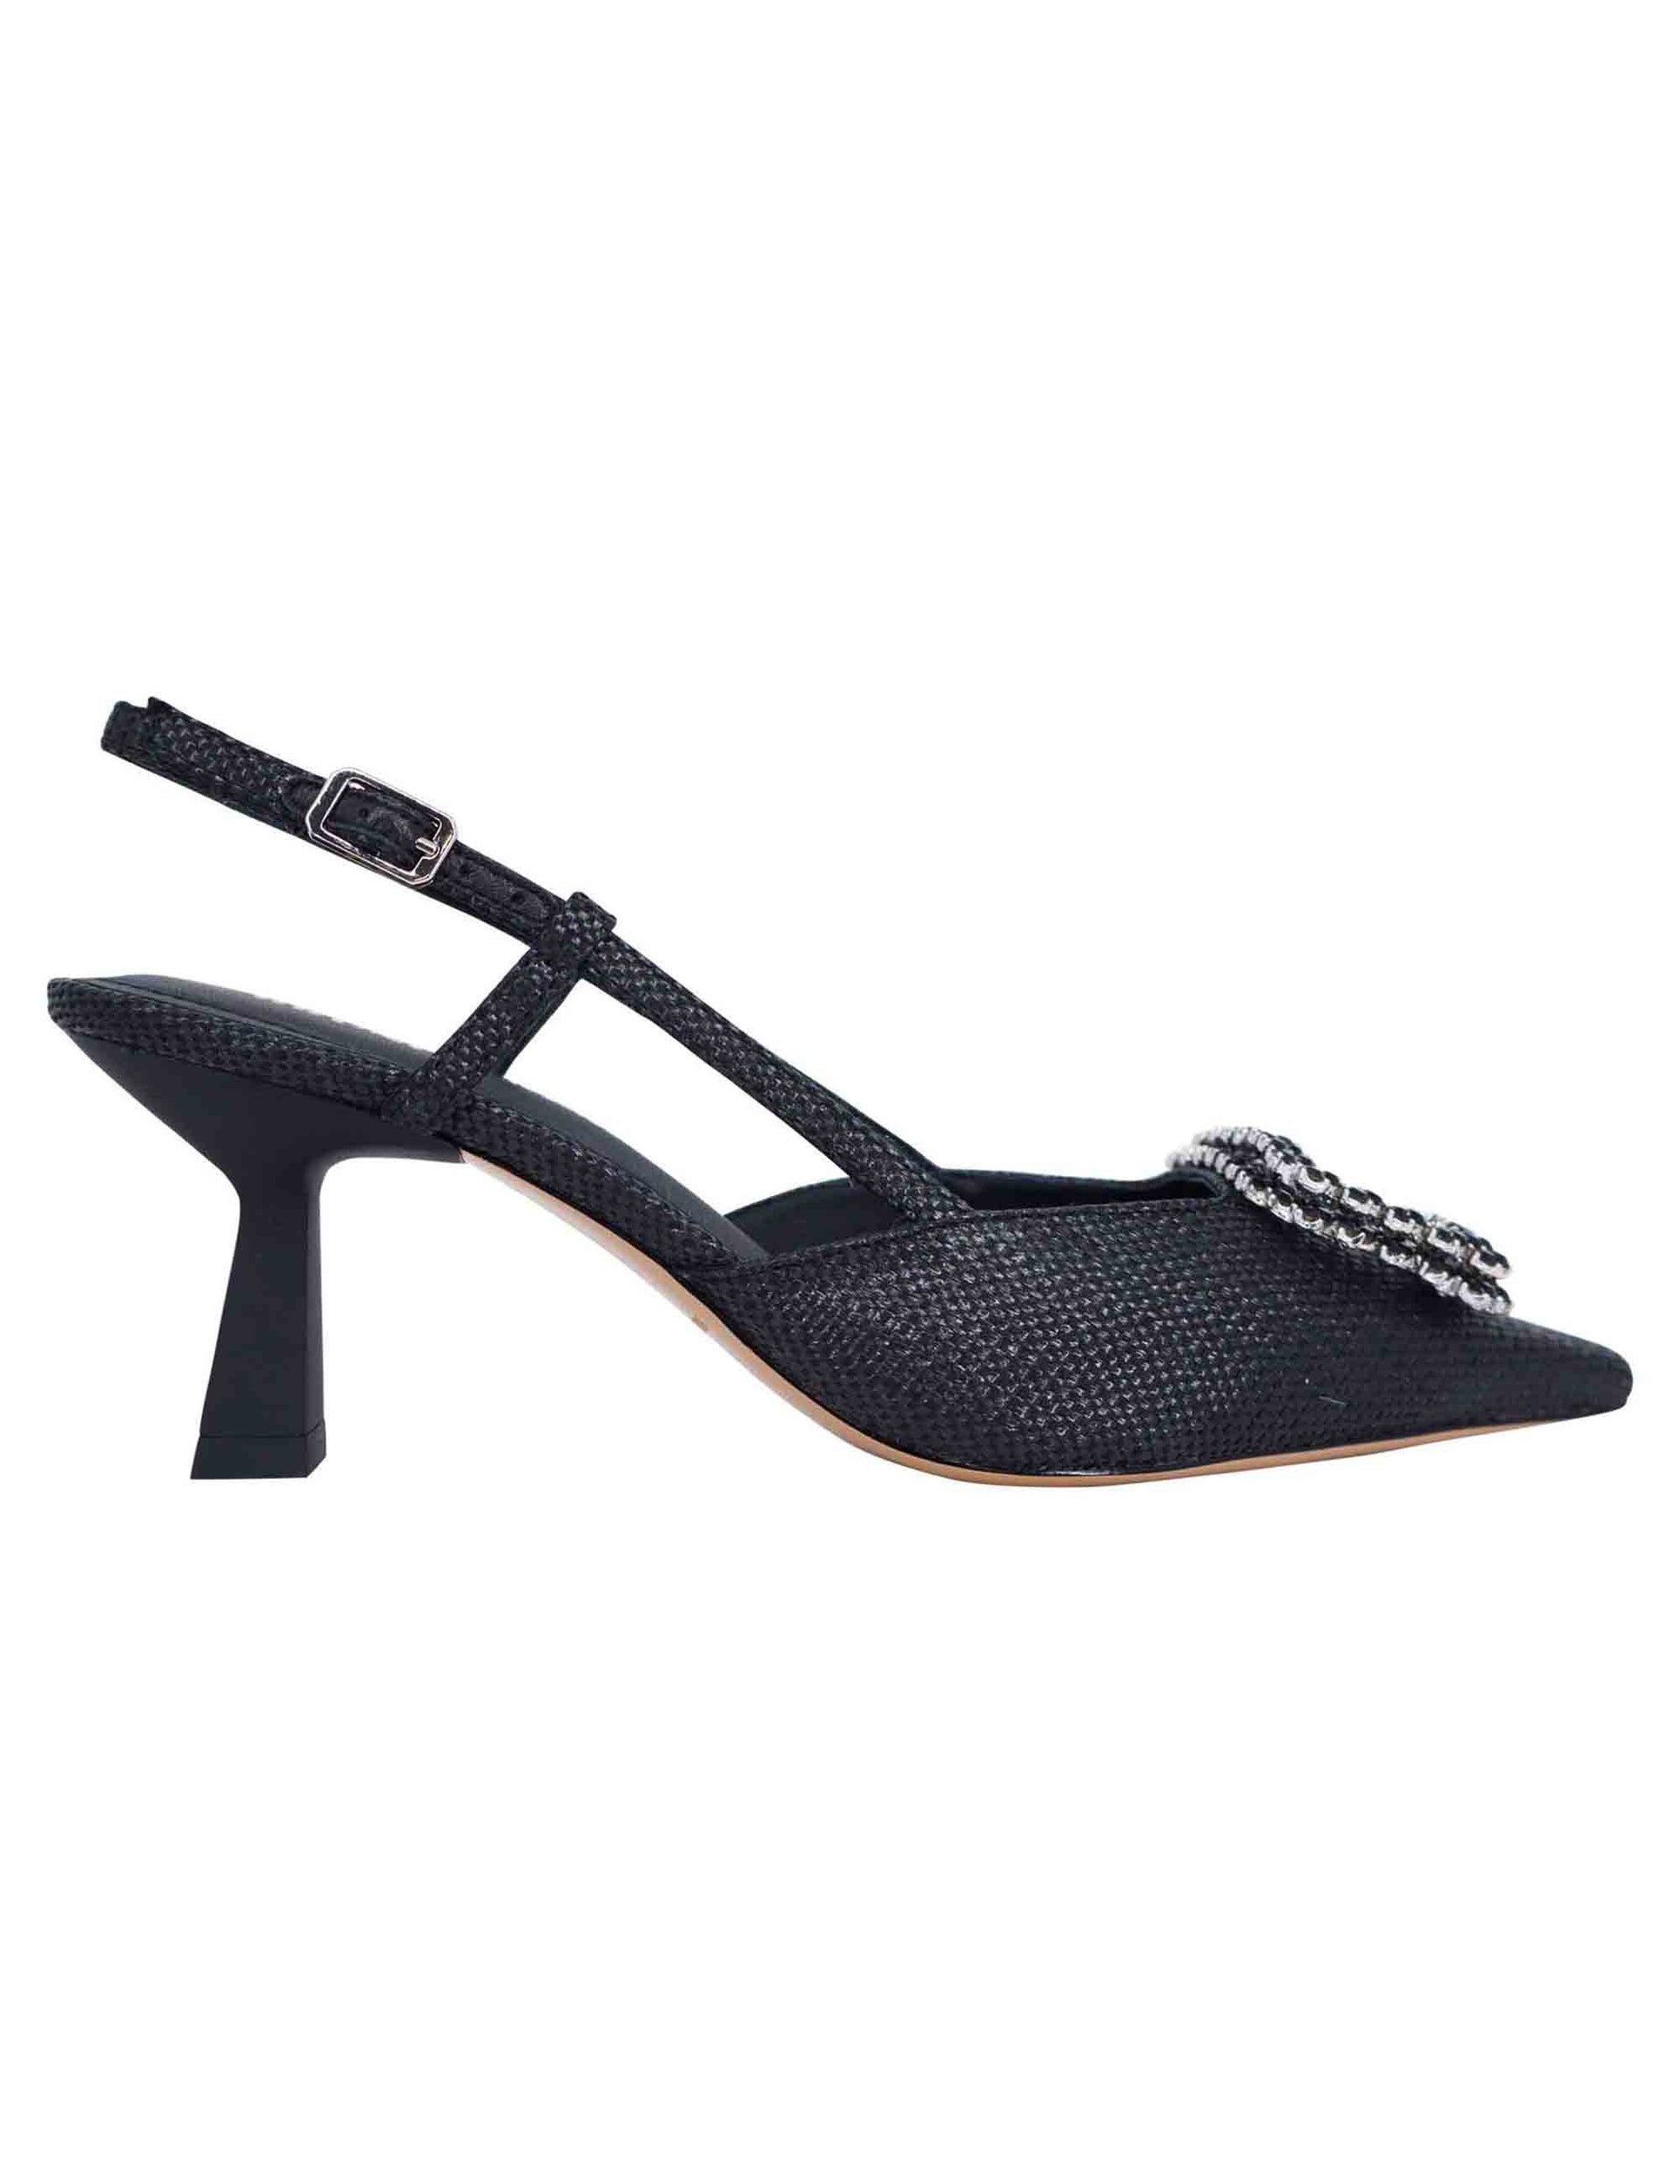 Women's slingback pumps in black fabric with rhinestone buckle and high heel